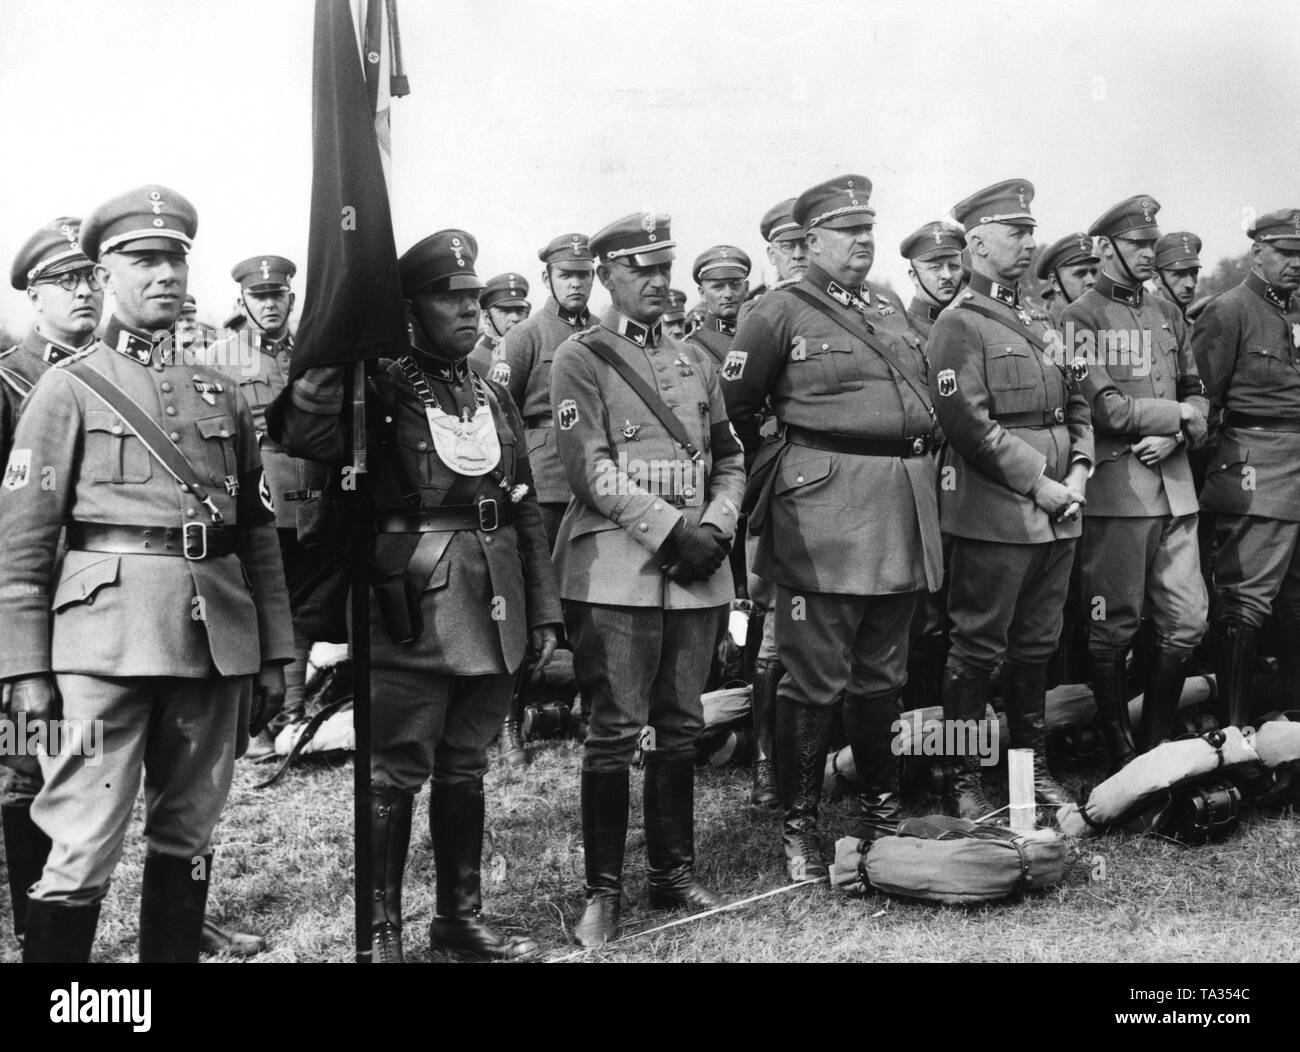 At the muster of the Stahlhelm at the Maschsee in Hanover. 2nd from left to right, Prince Oskar of Prussia, 4th from left, Prince Eitel Friedrich of Prussia. Stock Photo